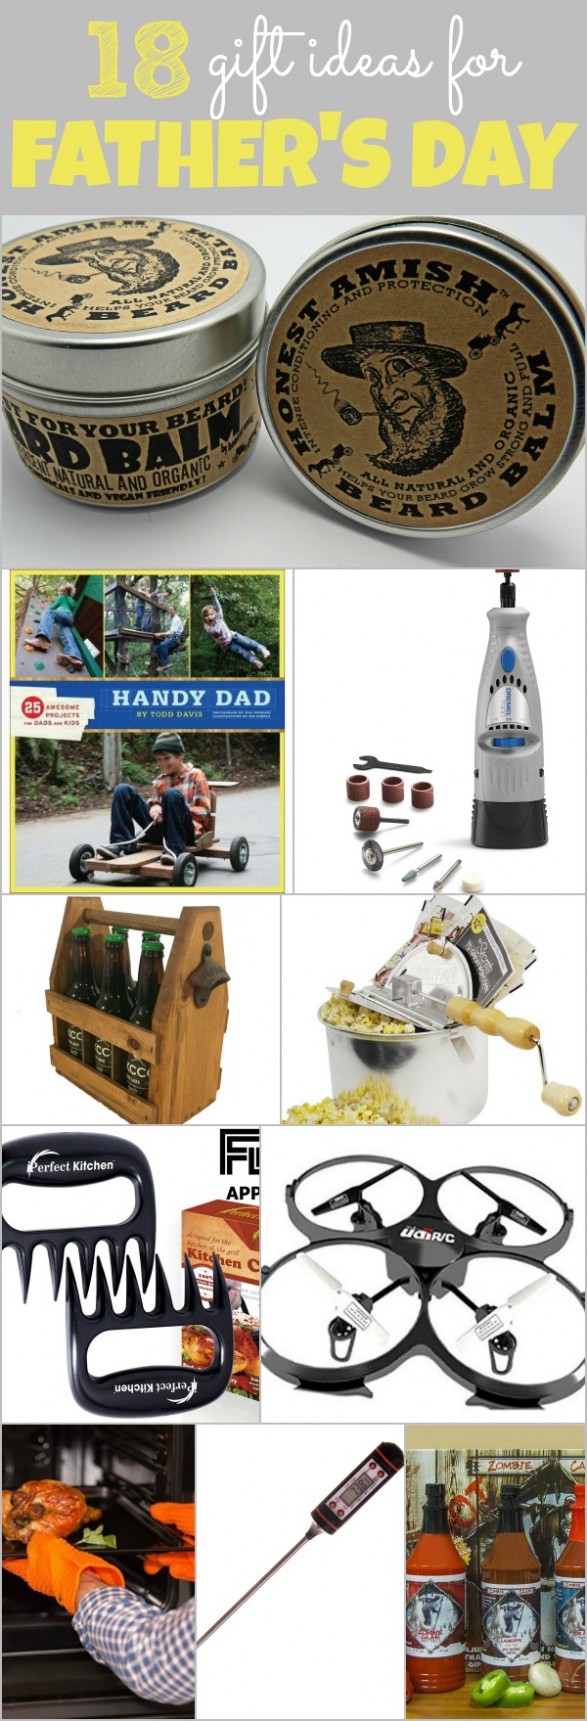 18 gift ideas for father's day